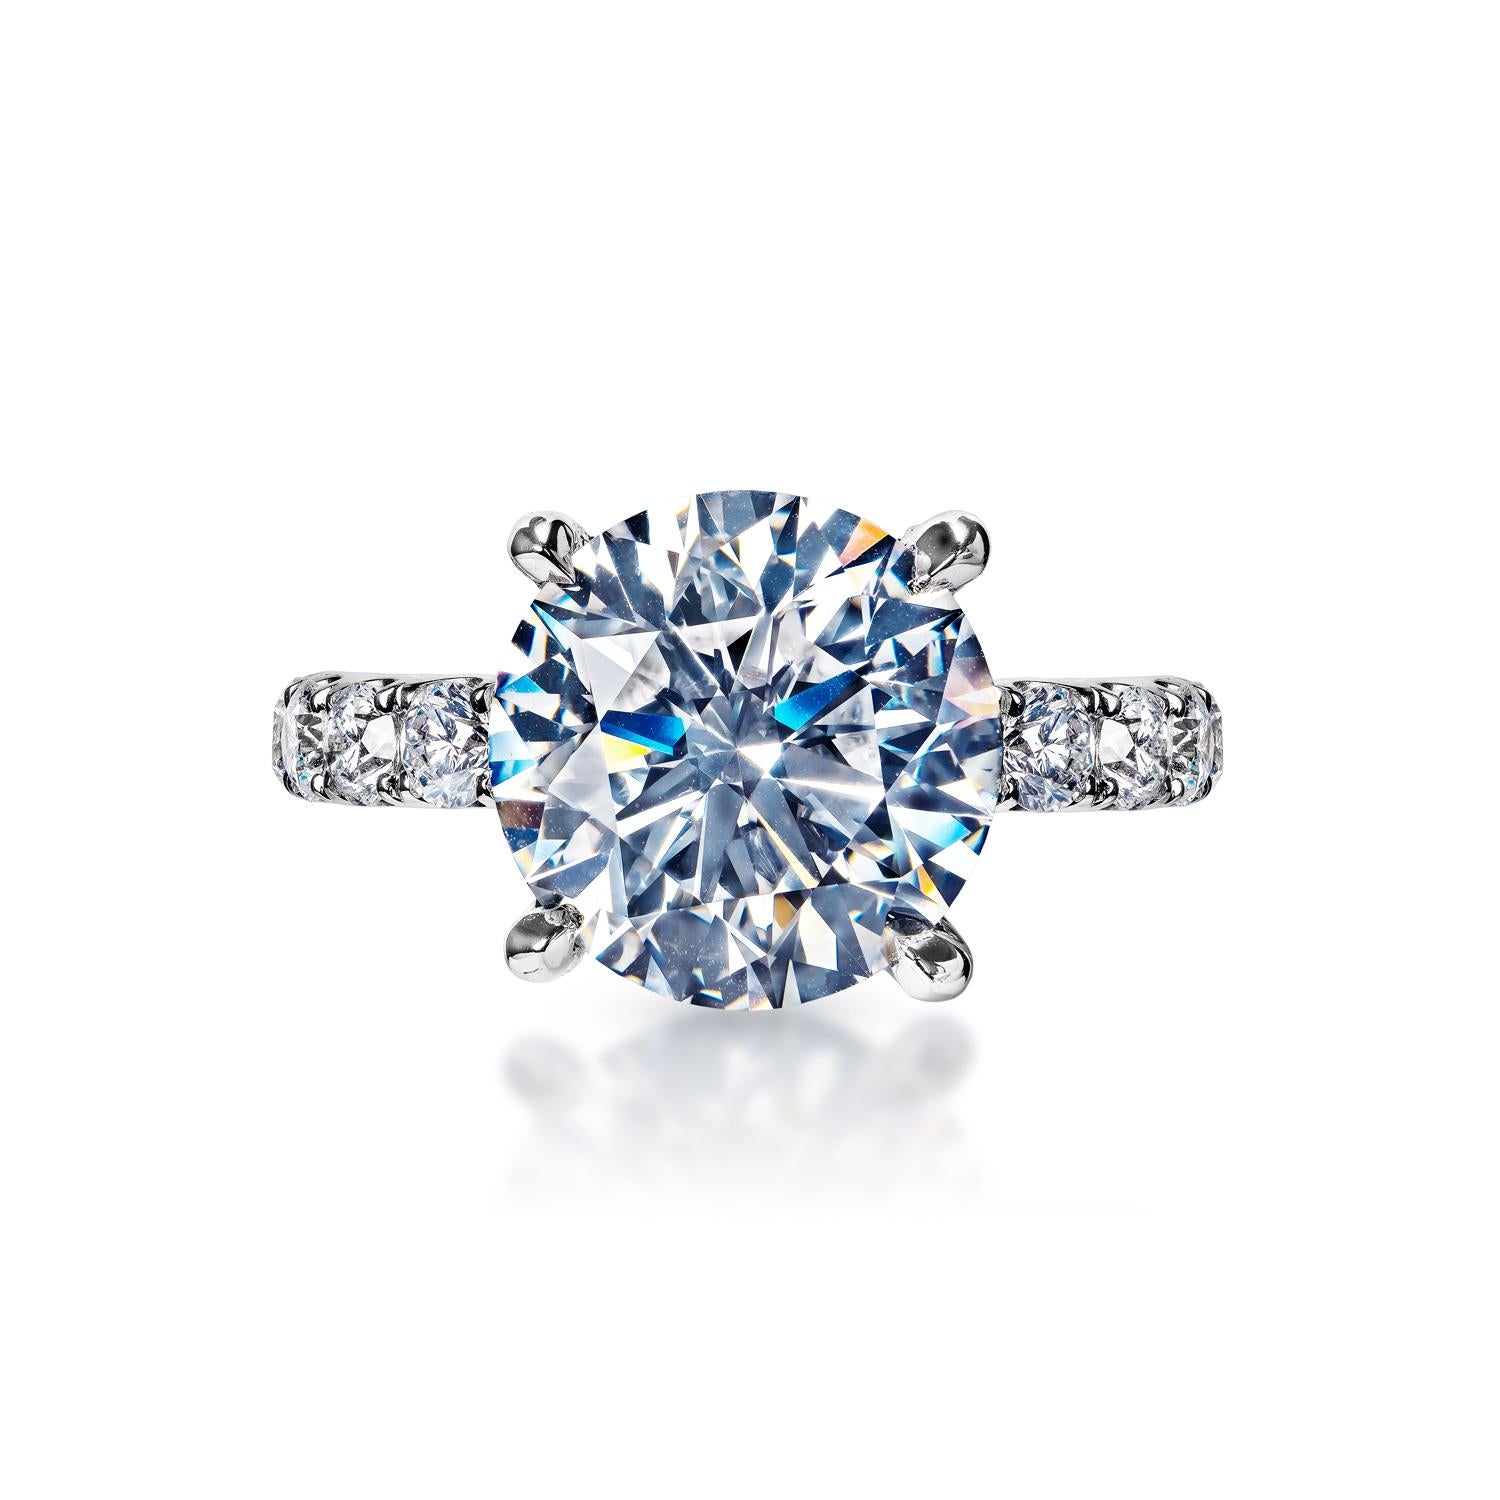 Earth Mined Center Diamond:
Carat Weight: 6.00 Carats
Color: E
Clarity: SI1
Style: Round Brilliant Cut

Carat Weight: 2.25 Carats
Shape: Round Brilliant Cut
Setting: 4 petite claw prong & shared prong
Metal: 18 Karat White Gold 7.60 grams

Total